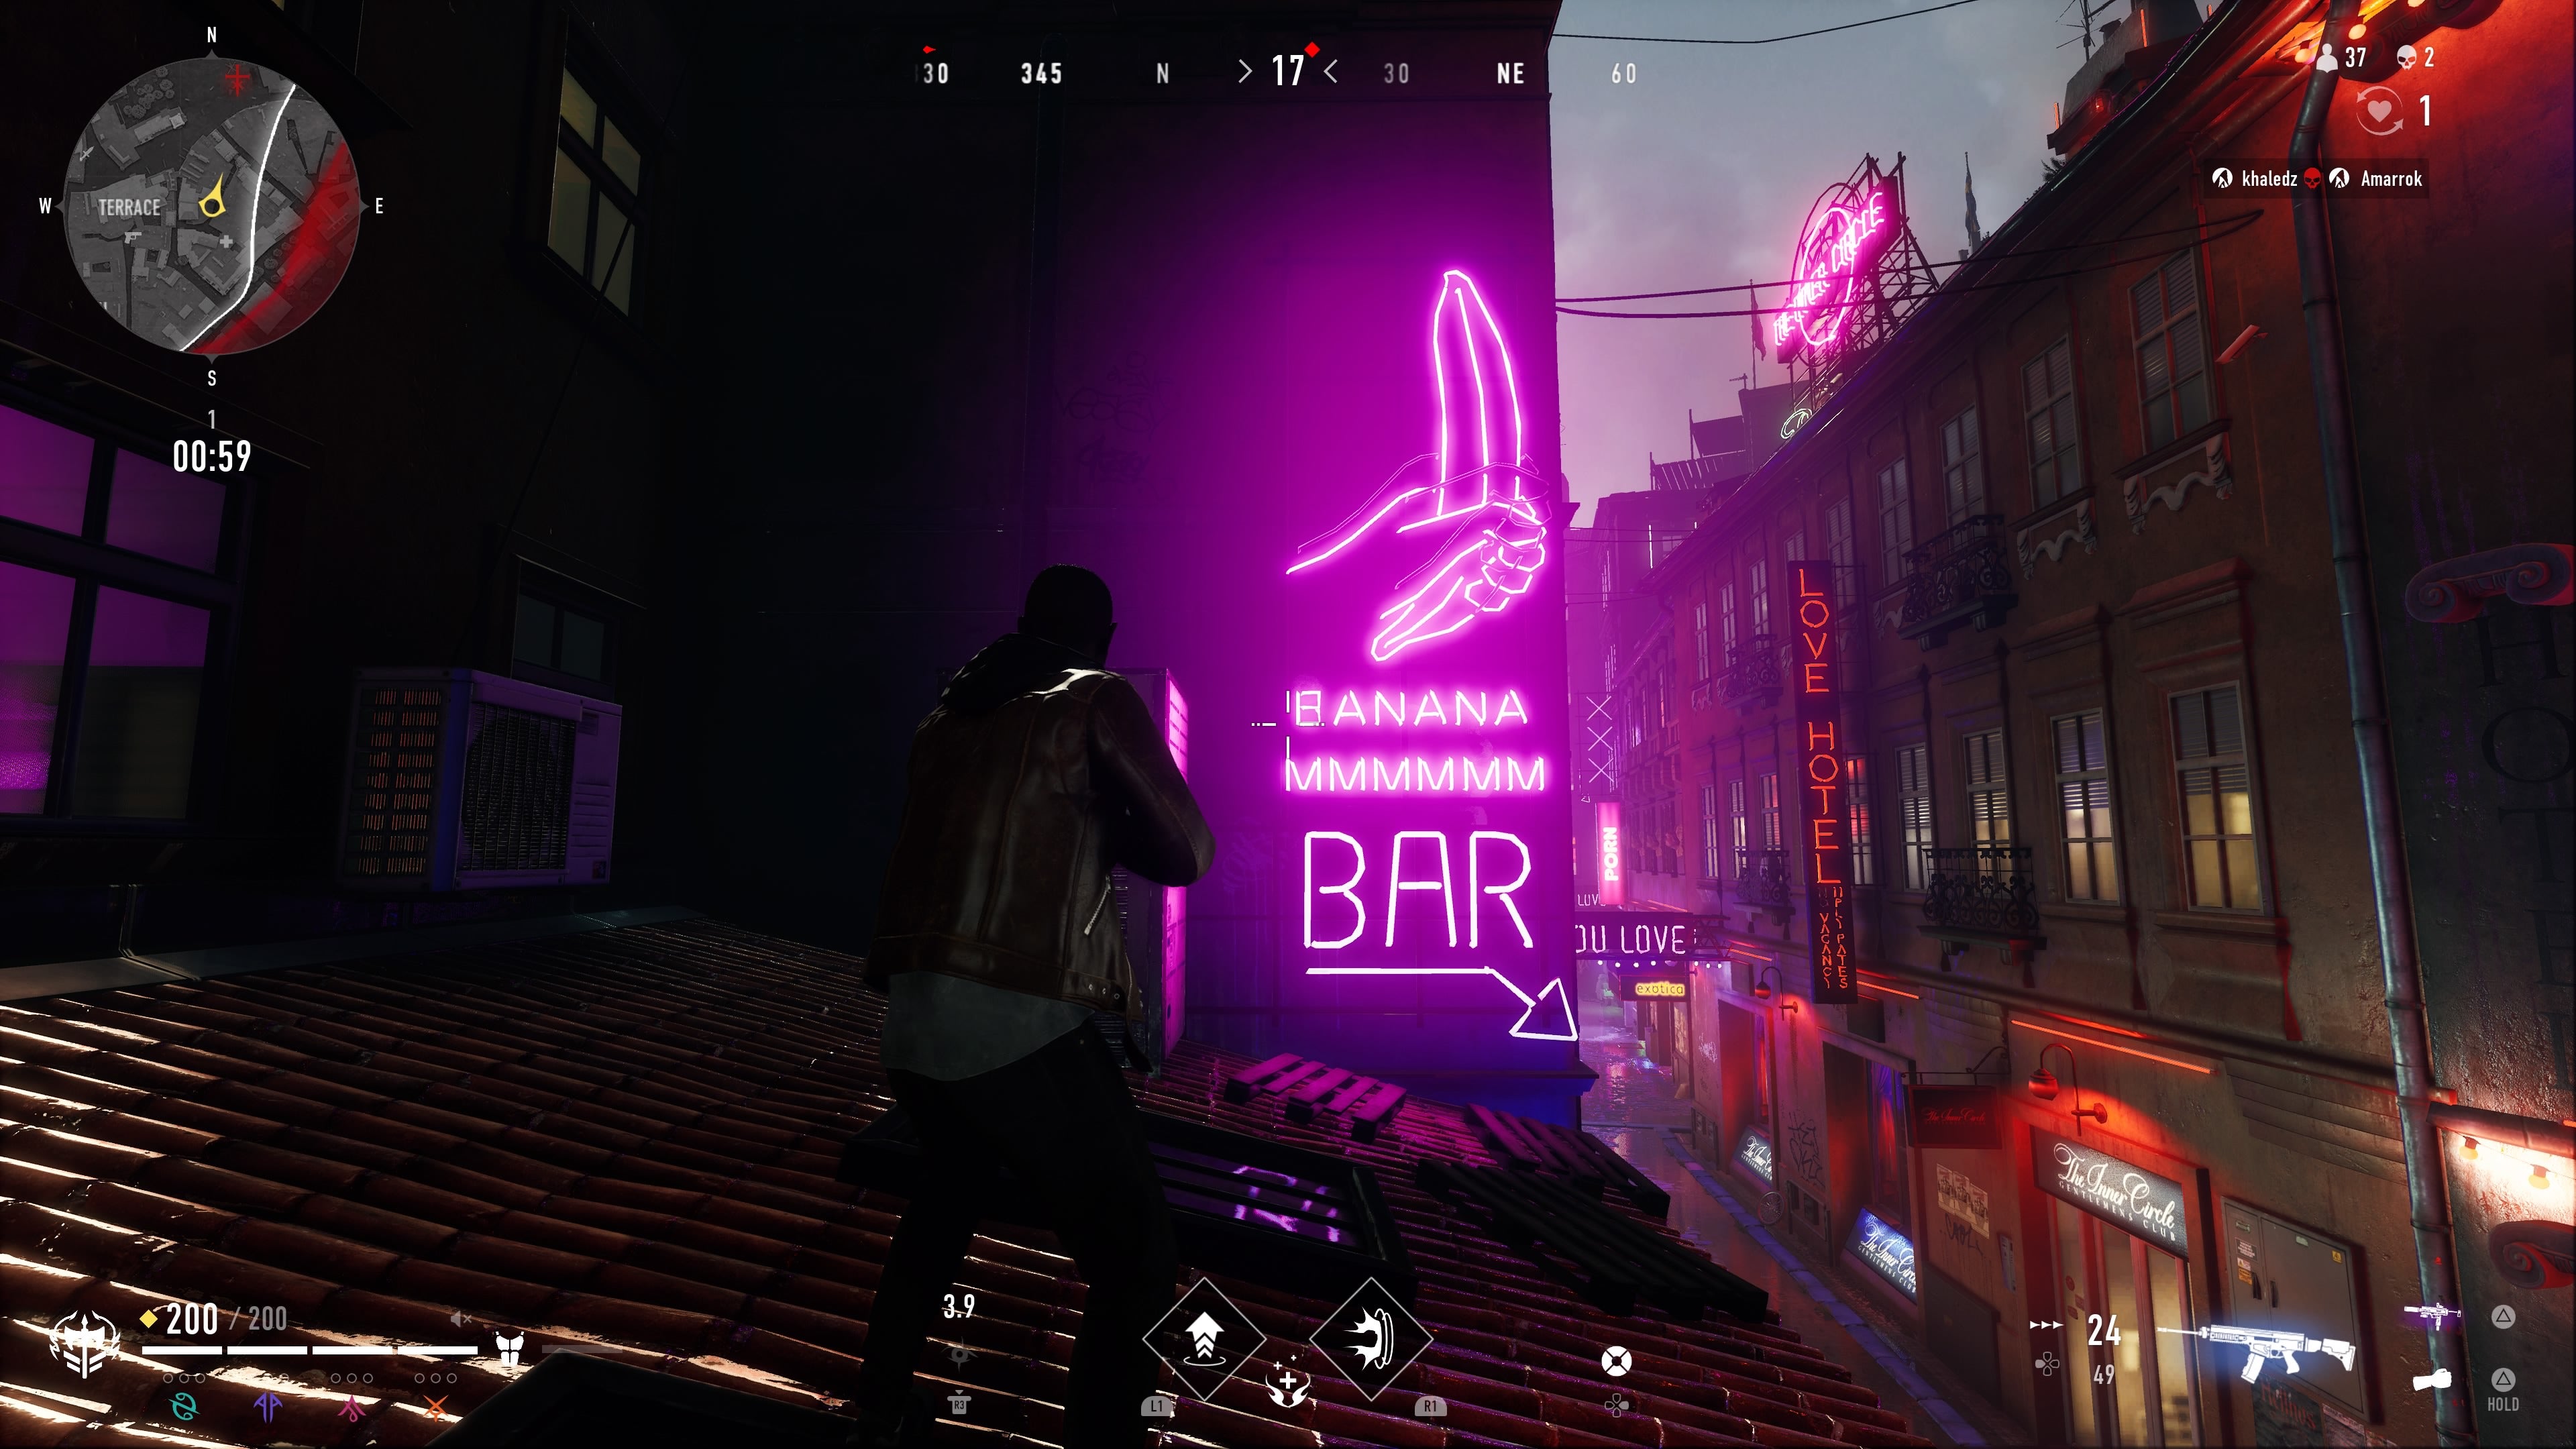 A neon sign in Prague. Vampire the Masquerade: Bloodhunt